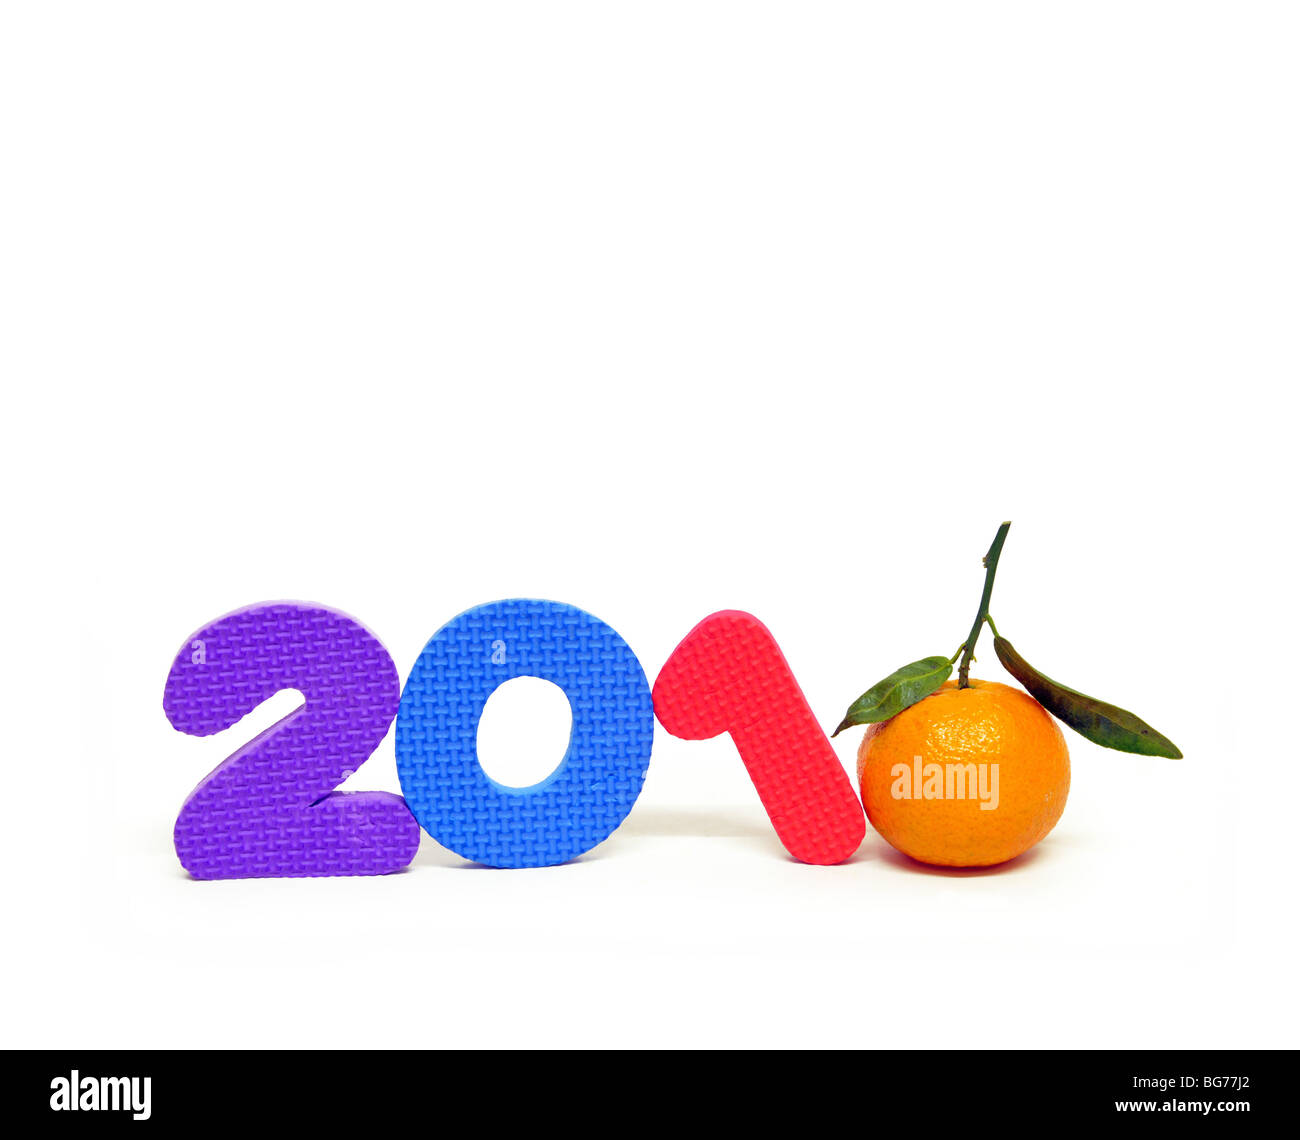 Still life of toy numbers and an orange creating the year 2010. Stock Photo